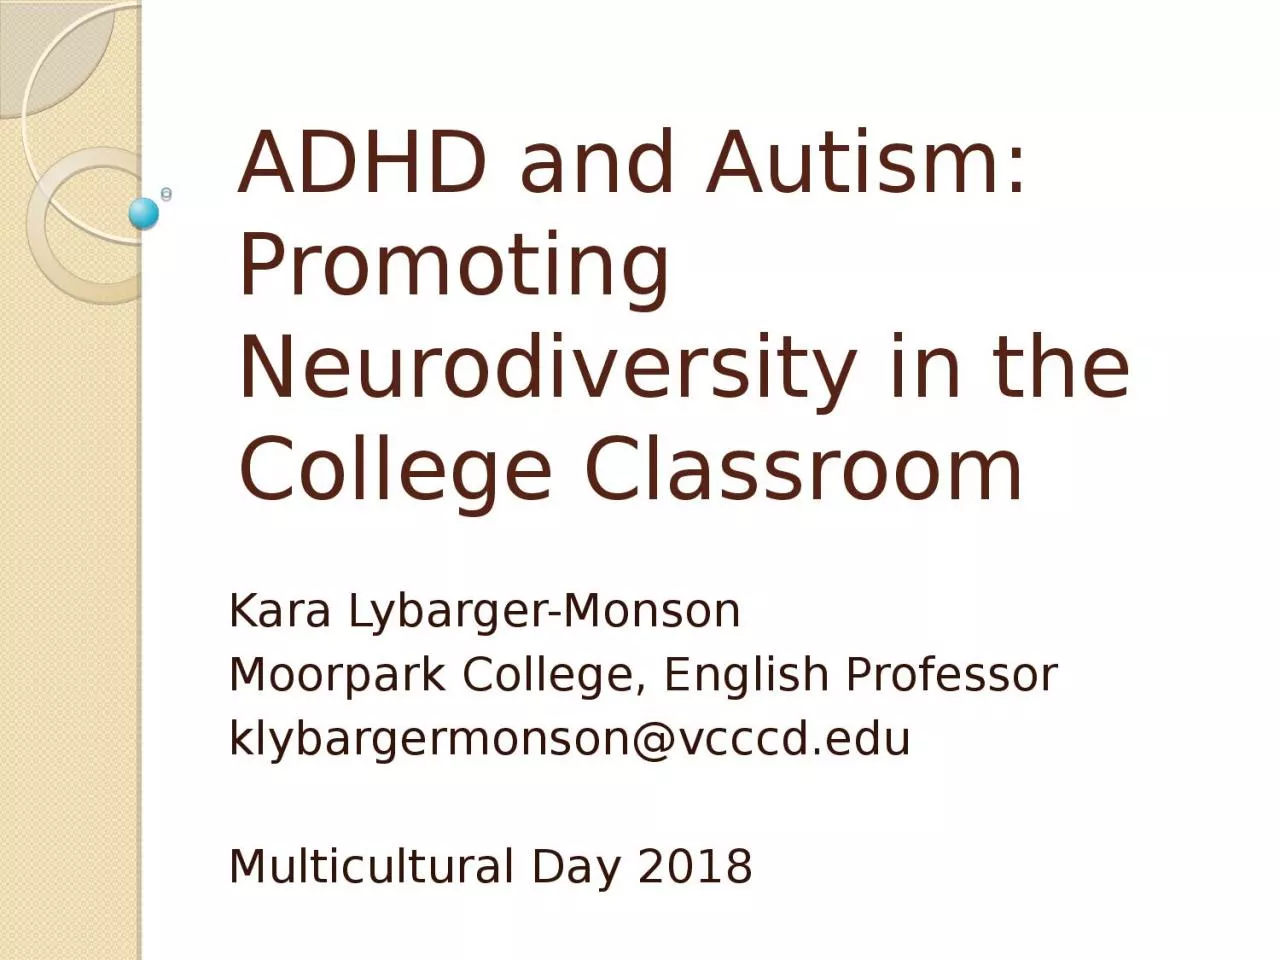 ADHD and Autism:  Promoting Neurodiversity in the College Classroom